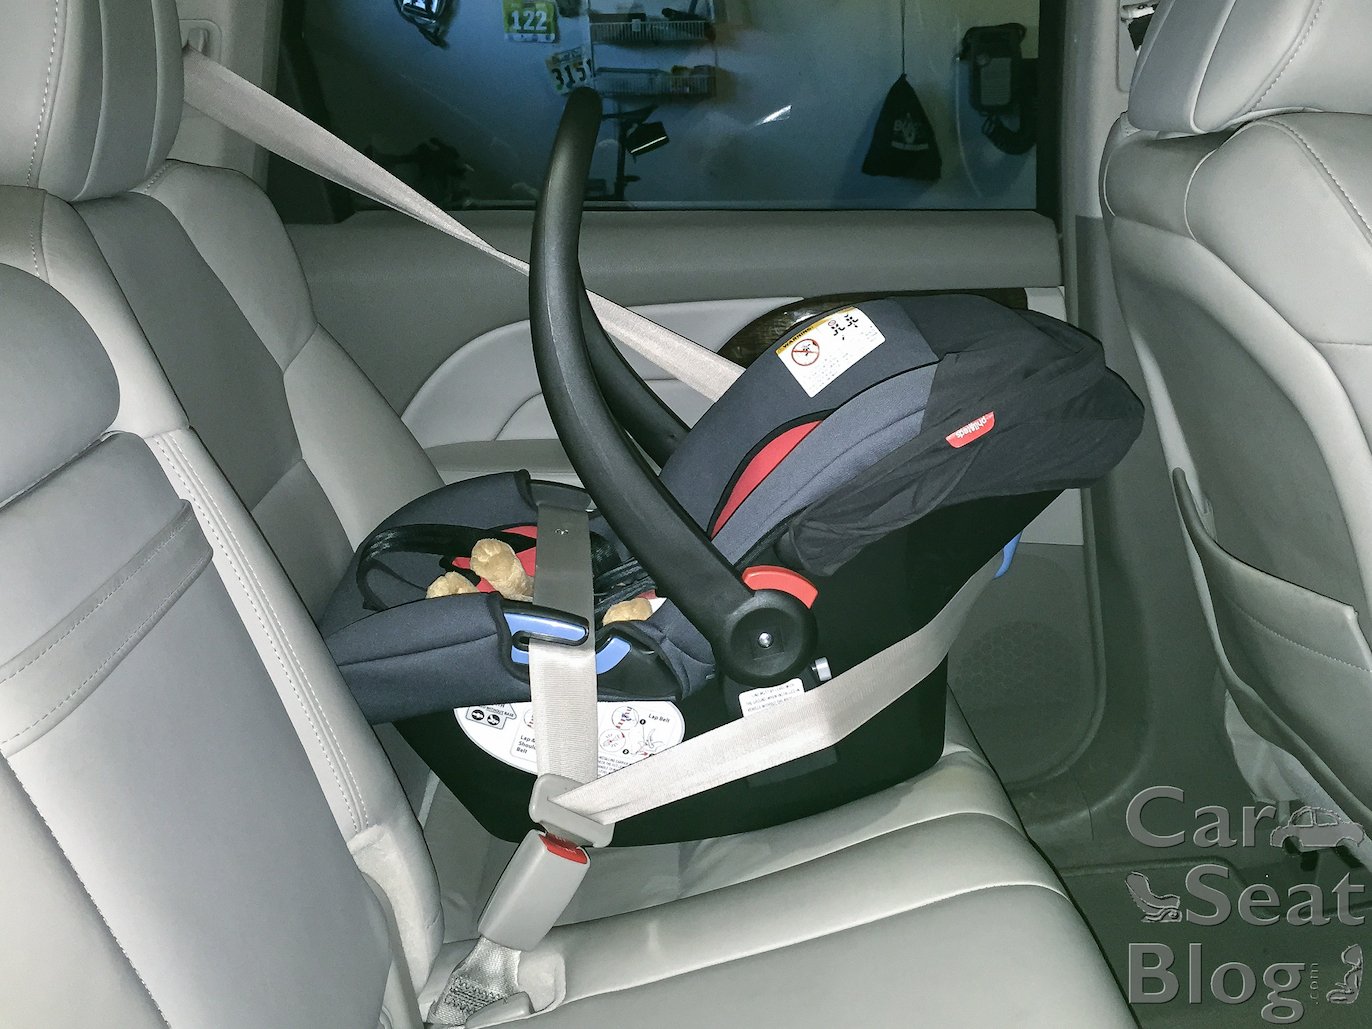 Purchase Install Graco Car Seat Without Base Up To 64 Off - How To Install Graco Baby Car Seat With Seatbelt